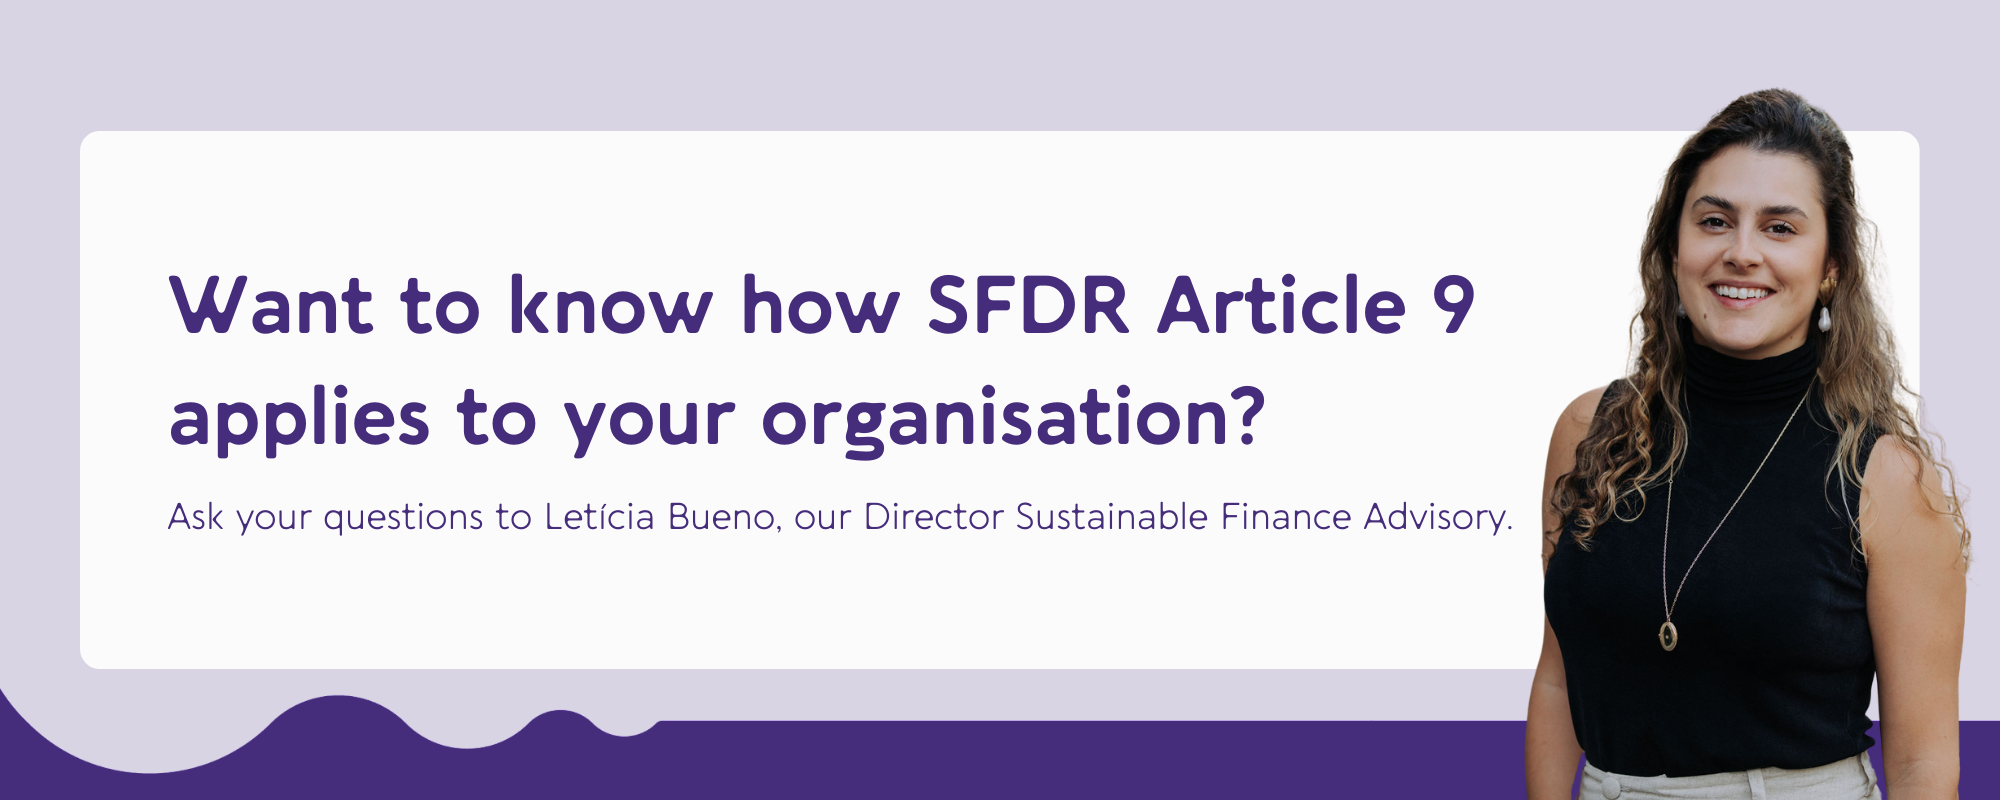 Want to know how SFDR Article 9 applies to your organisation?